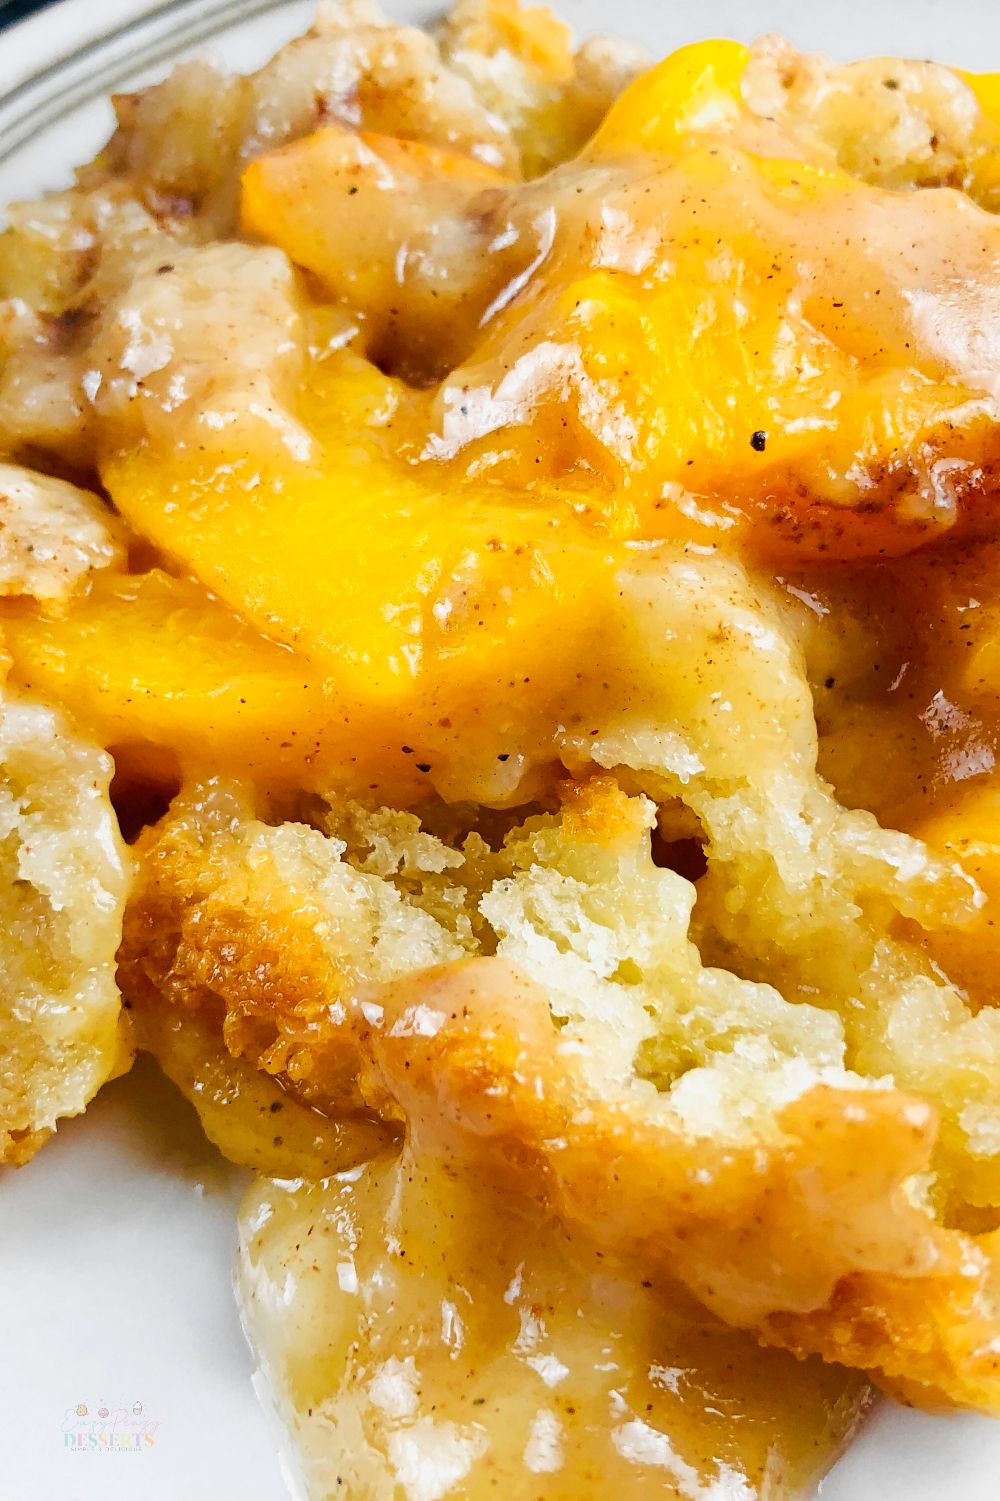 Peach cobbler with canned peaches